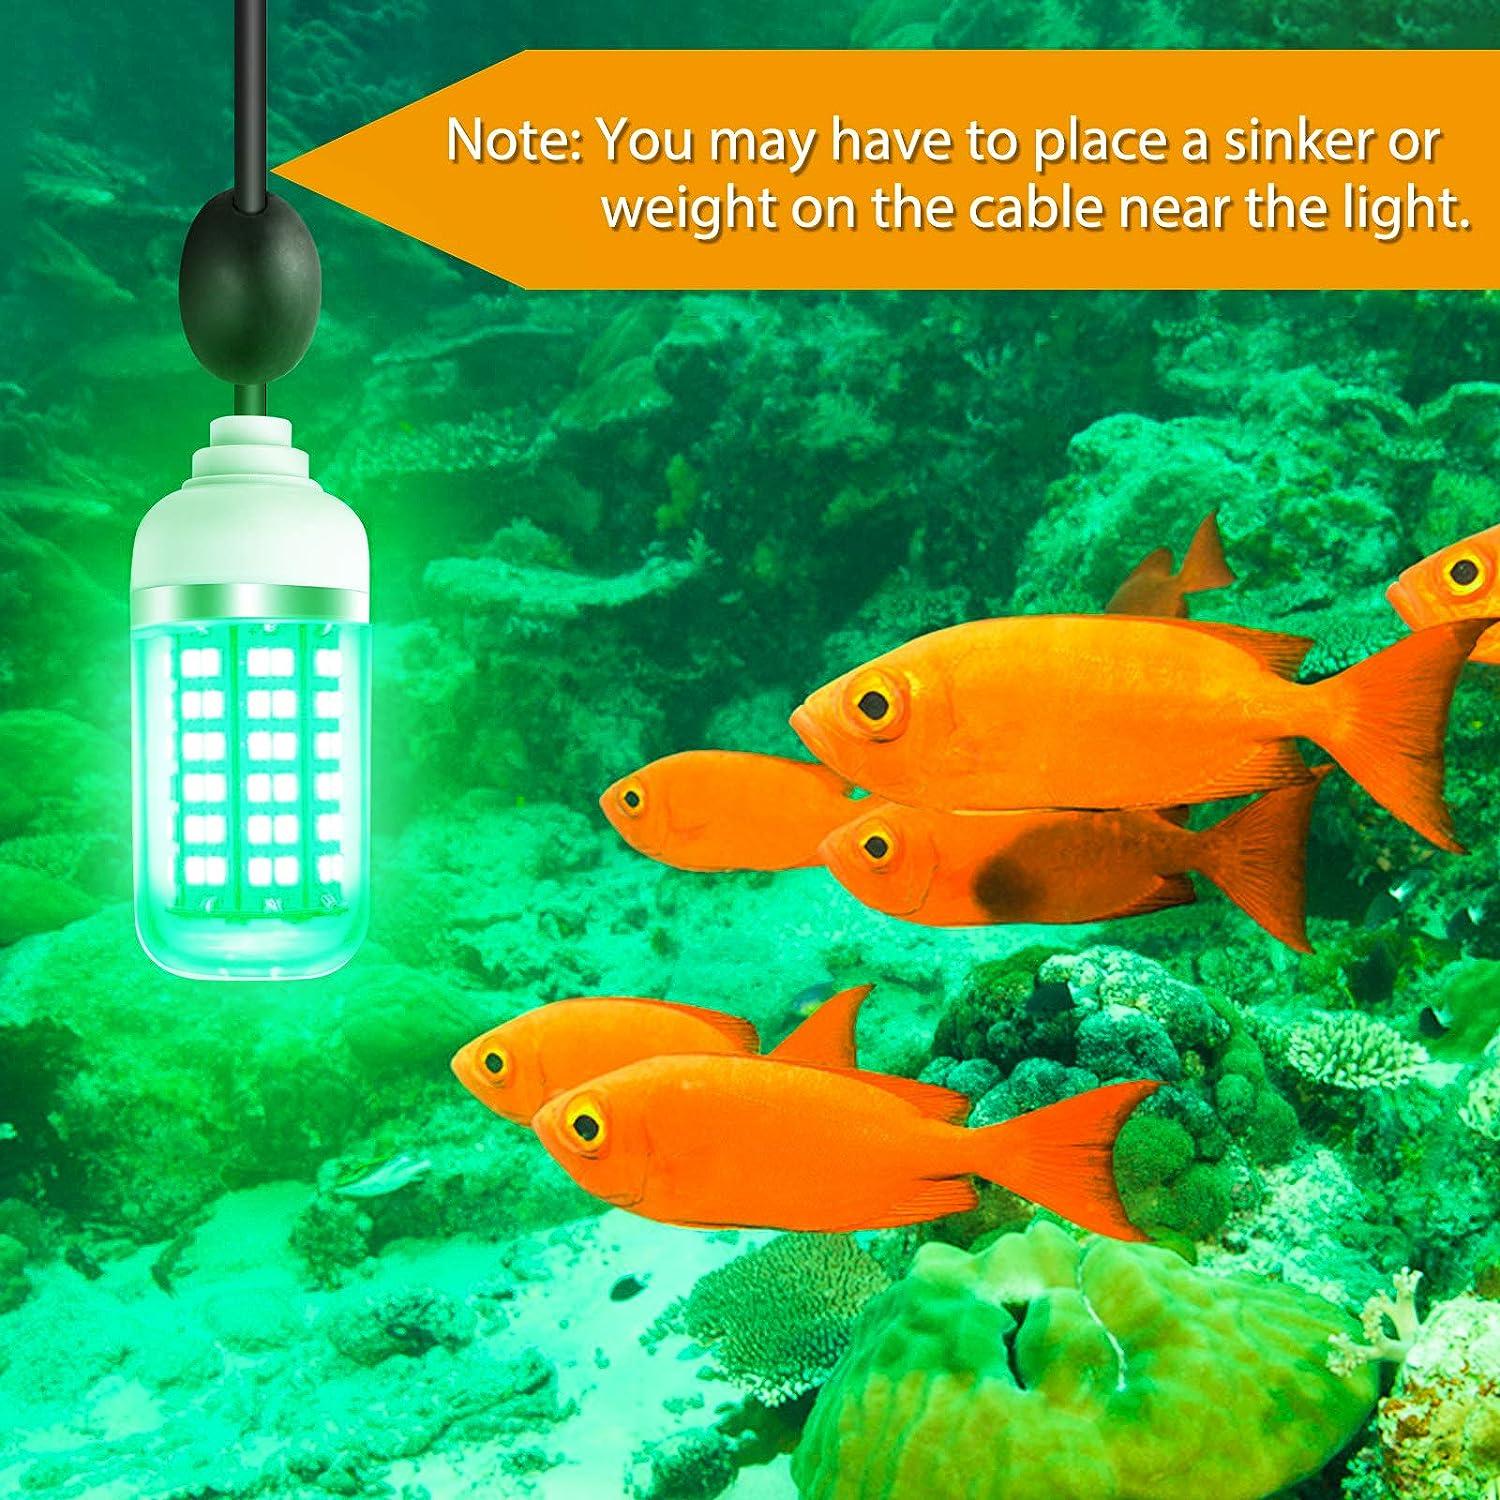 12V 10W/45W LED Submersible Fishing Light, Underwater Night Fishing Finder  Lamp Crappie Lures Bait Squid Shrimp Light, Ice Fishing Light for Boat Dock,  Attractants More Fish in Freshwater & Saltwater